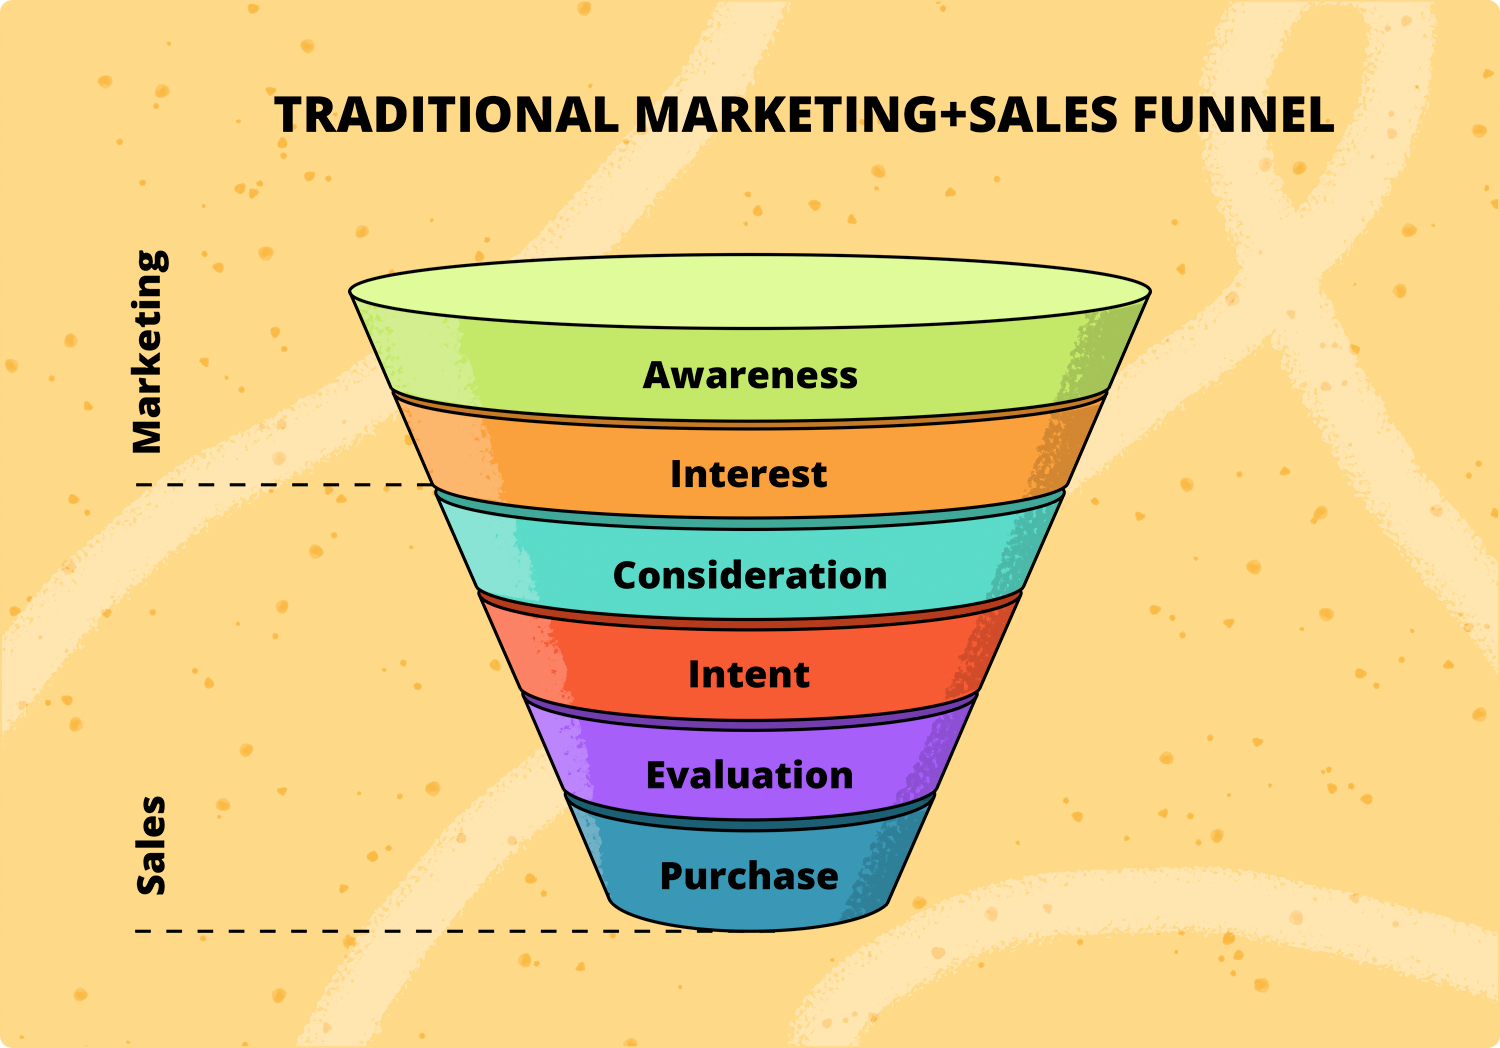 Traditional marketing + sales funnel